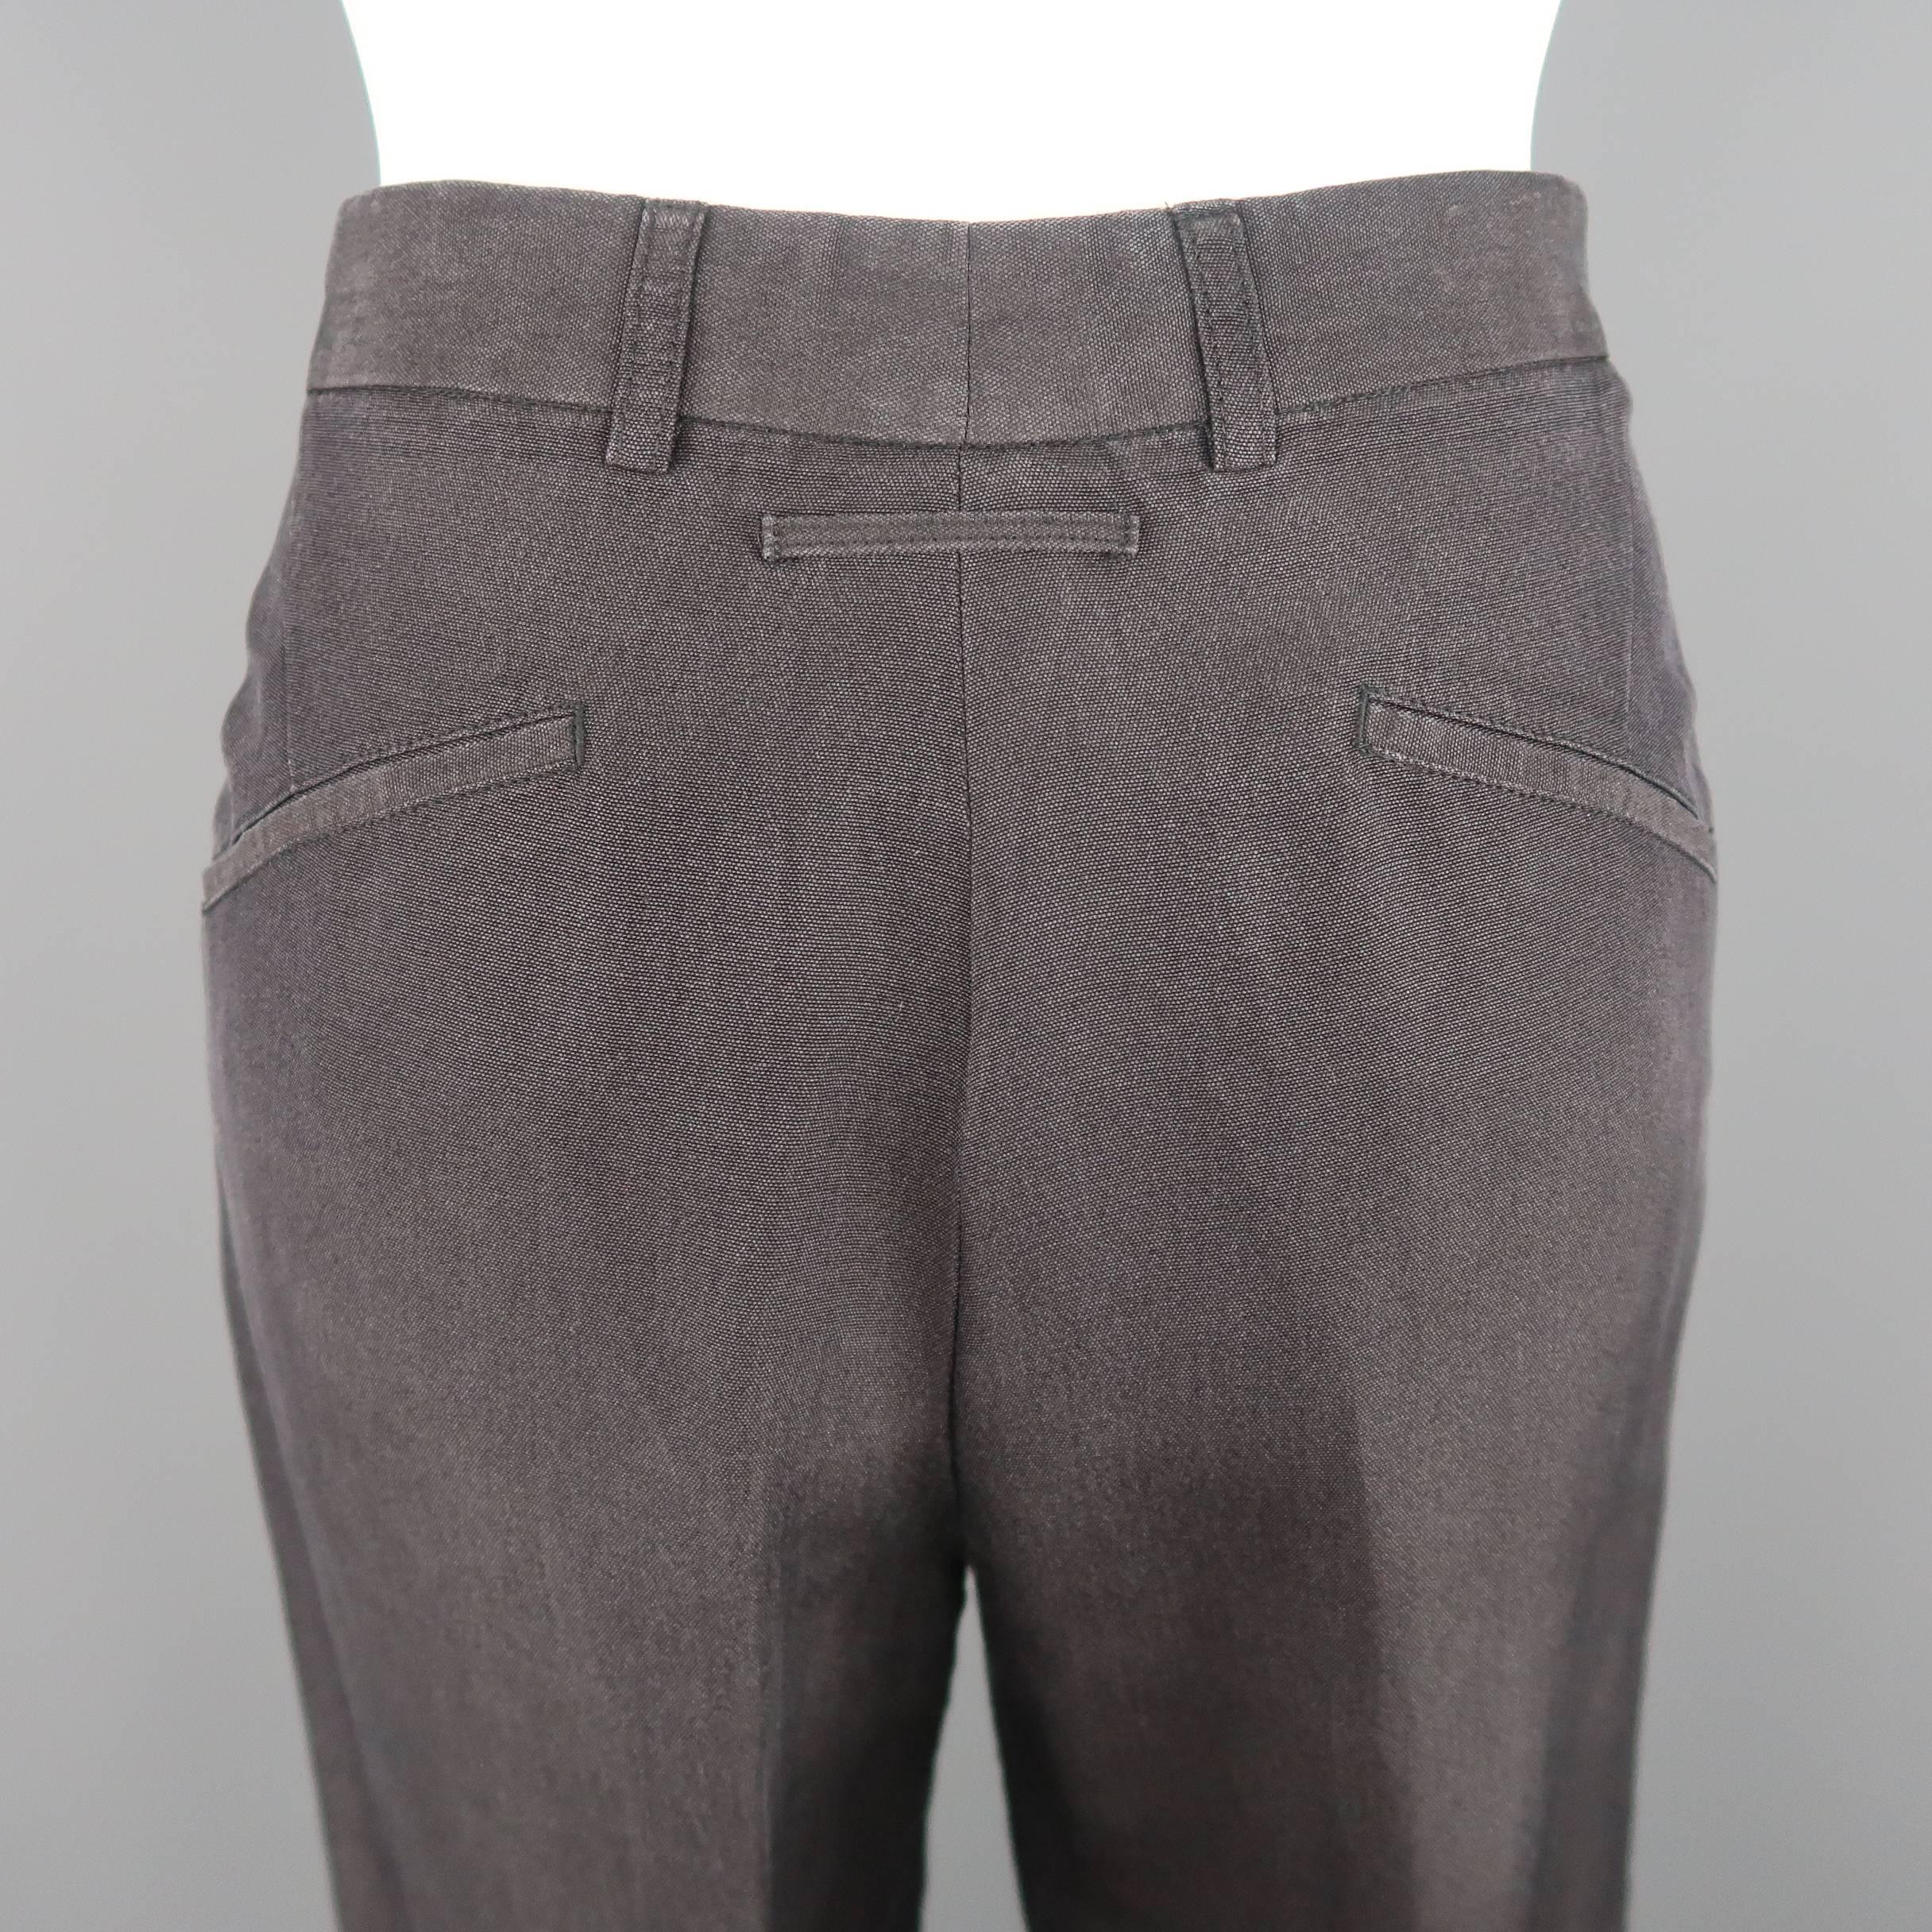 Jean Paul Gaultier Charcoal Polyester Silk Cropped Casual Pants 1